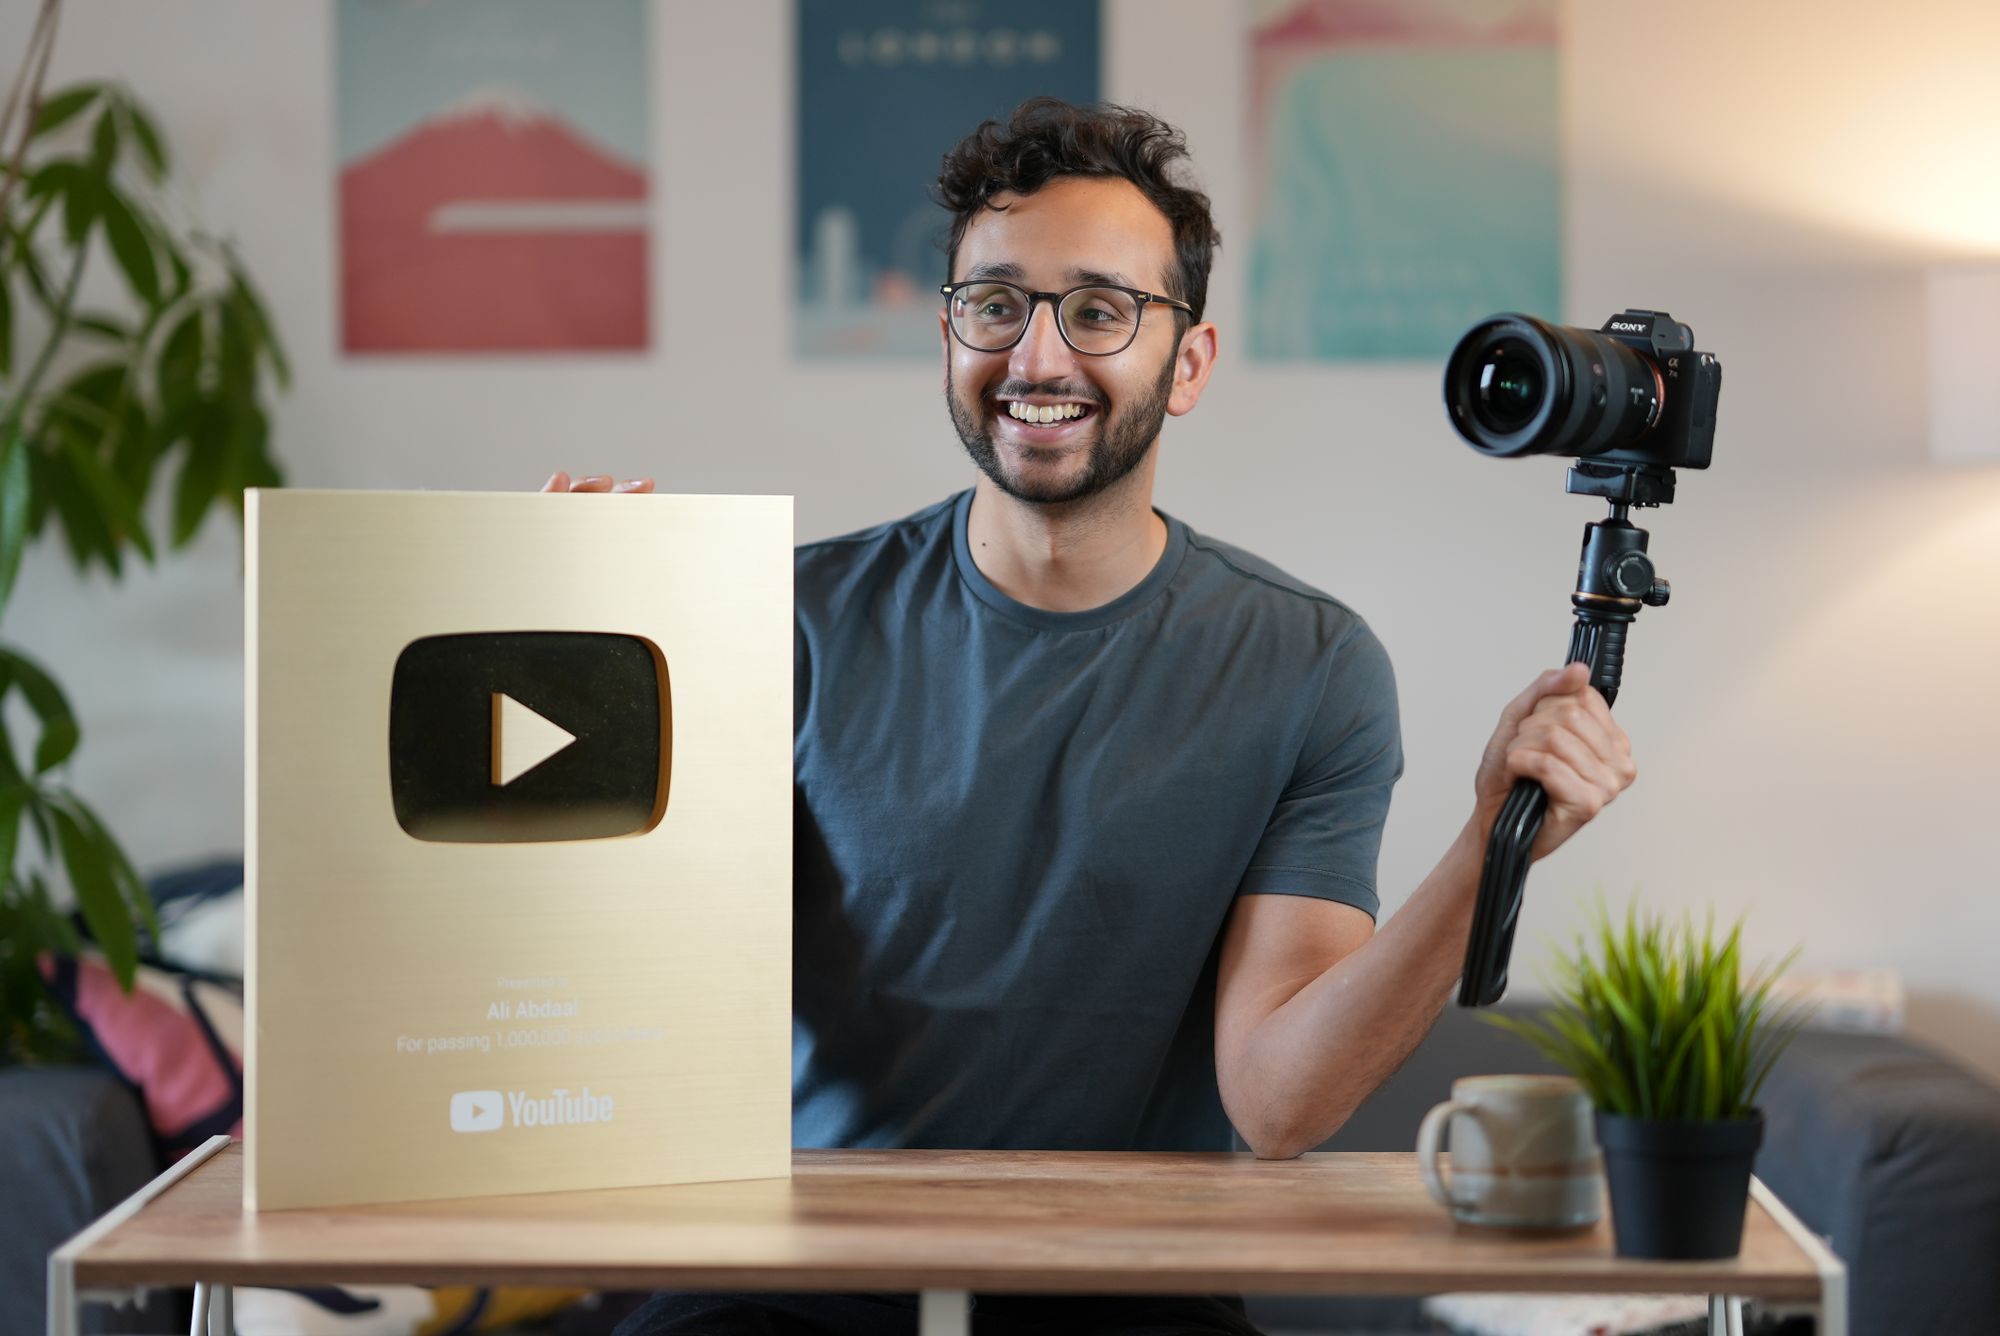 Ali holding his 2M plaque and a DSLR camera